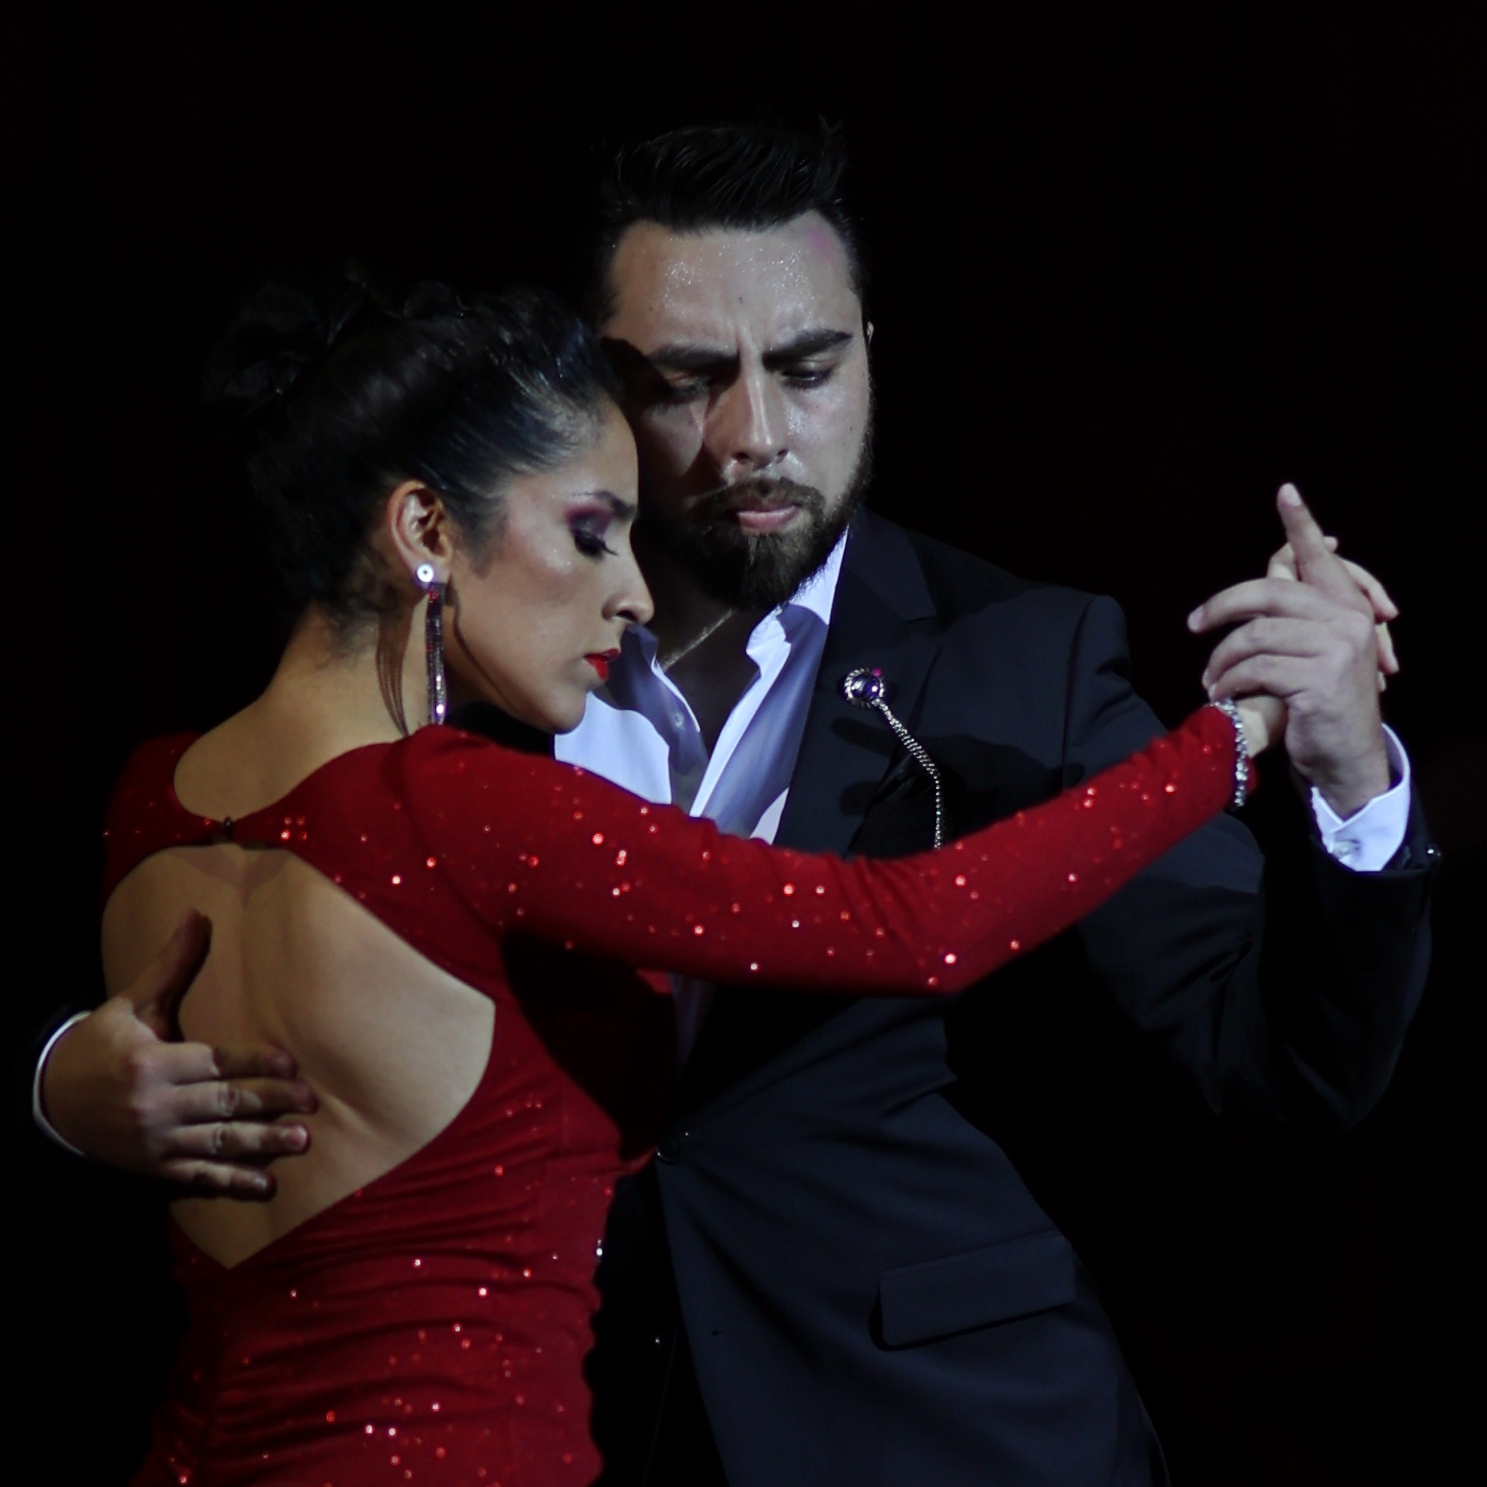 Jonathan Saavedra & Clarisa Aragon. Milonga. The milonga invites us to enjoy and play, and with this we can take advantage of its dynamics, variations and cadence. 